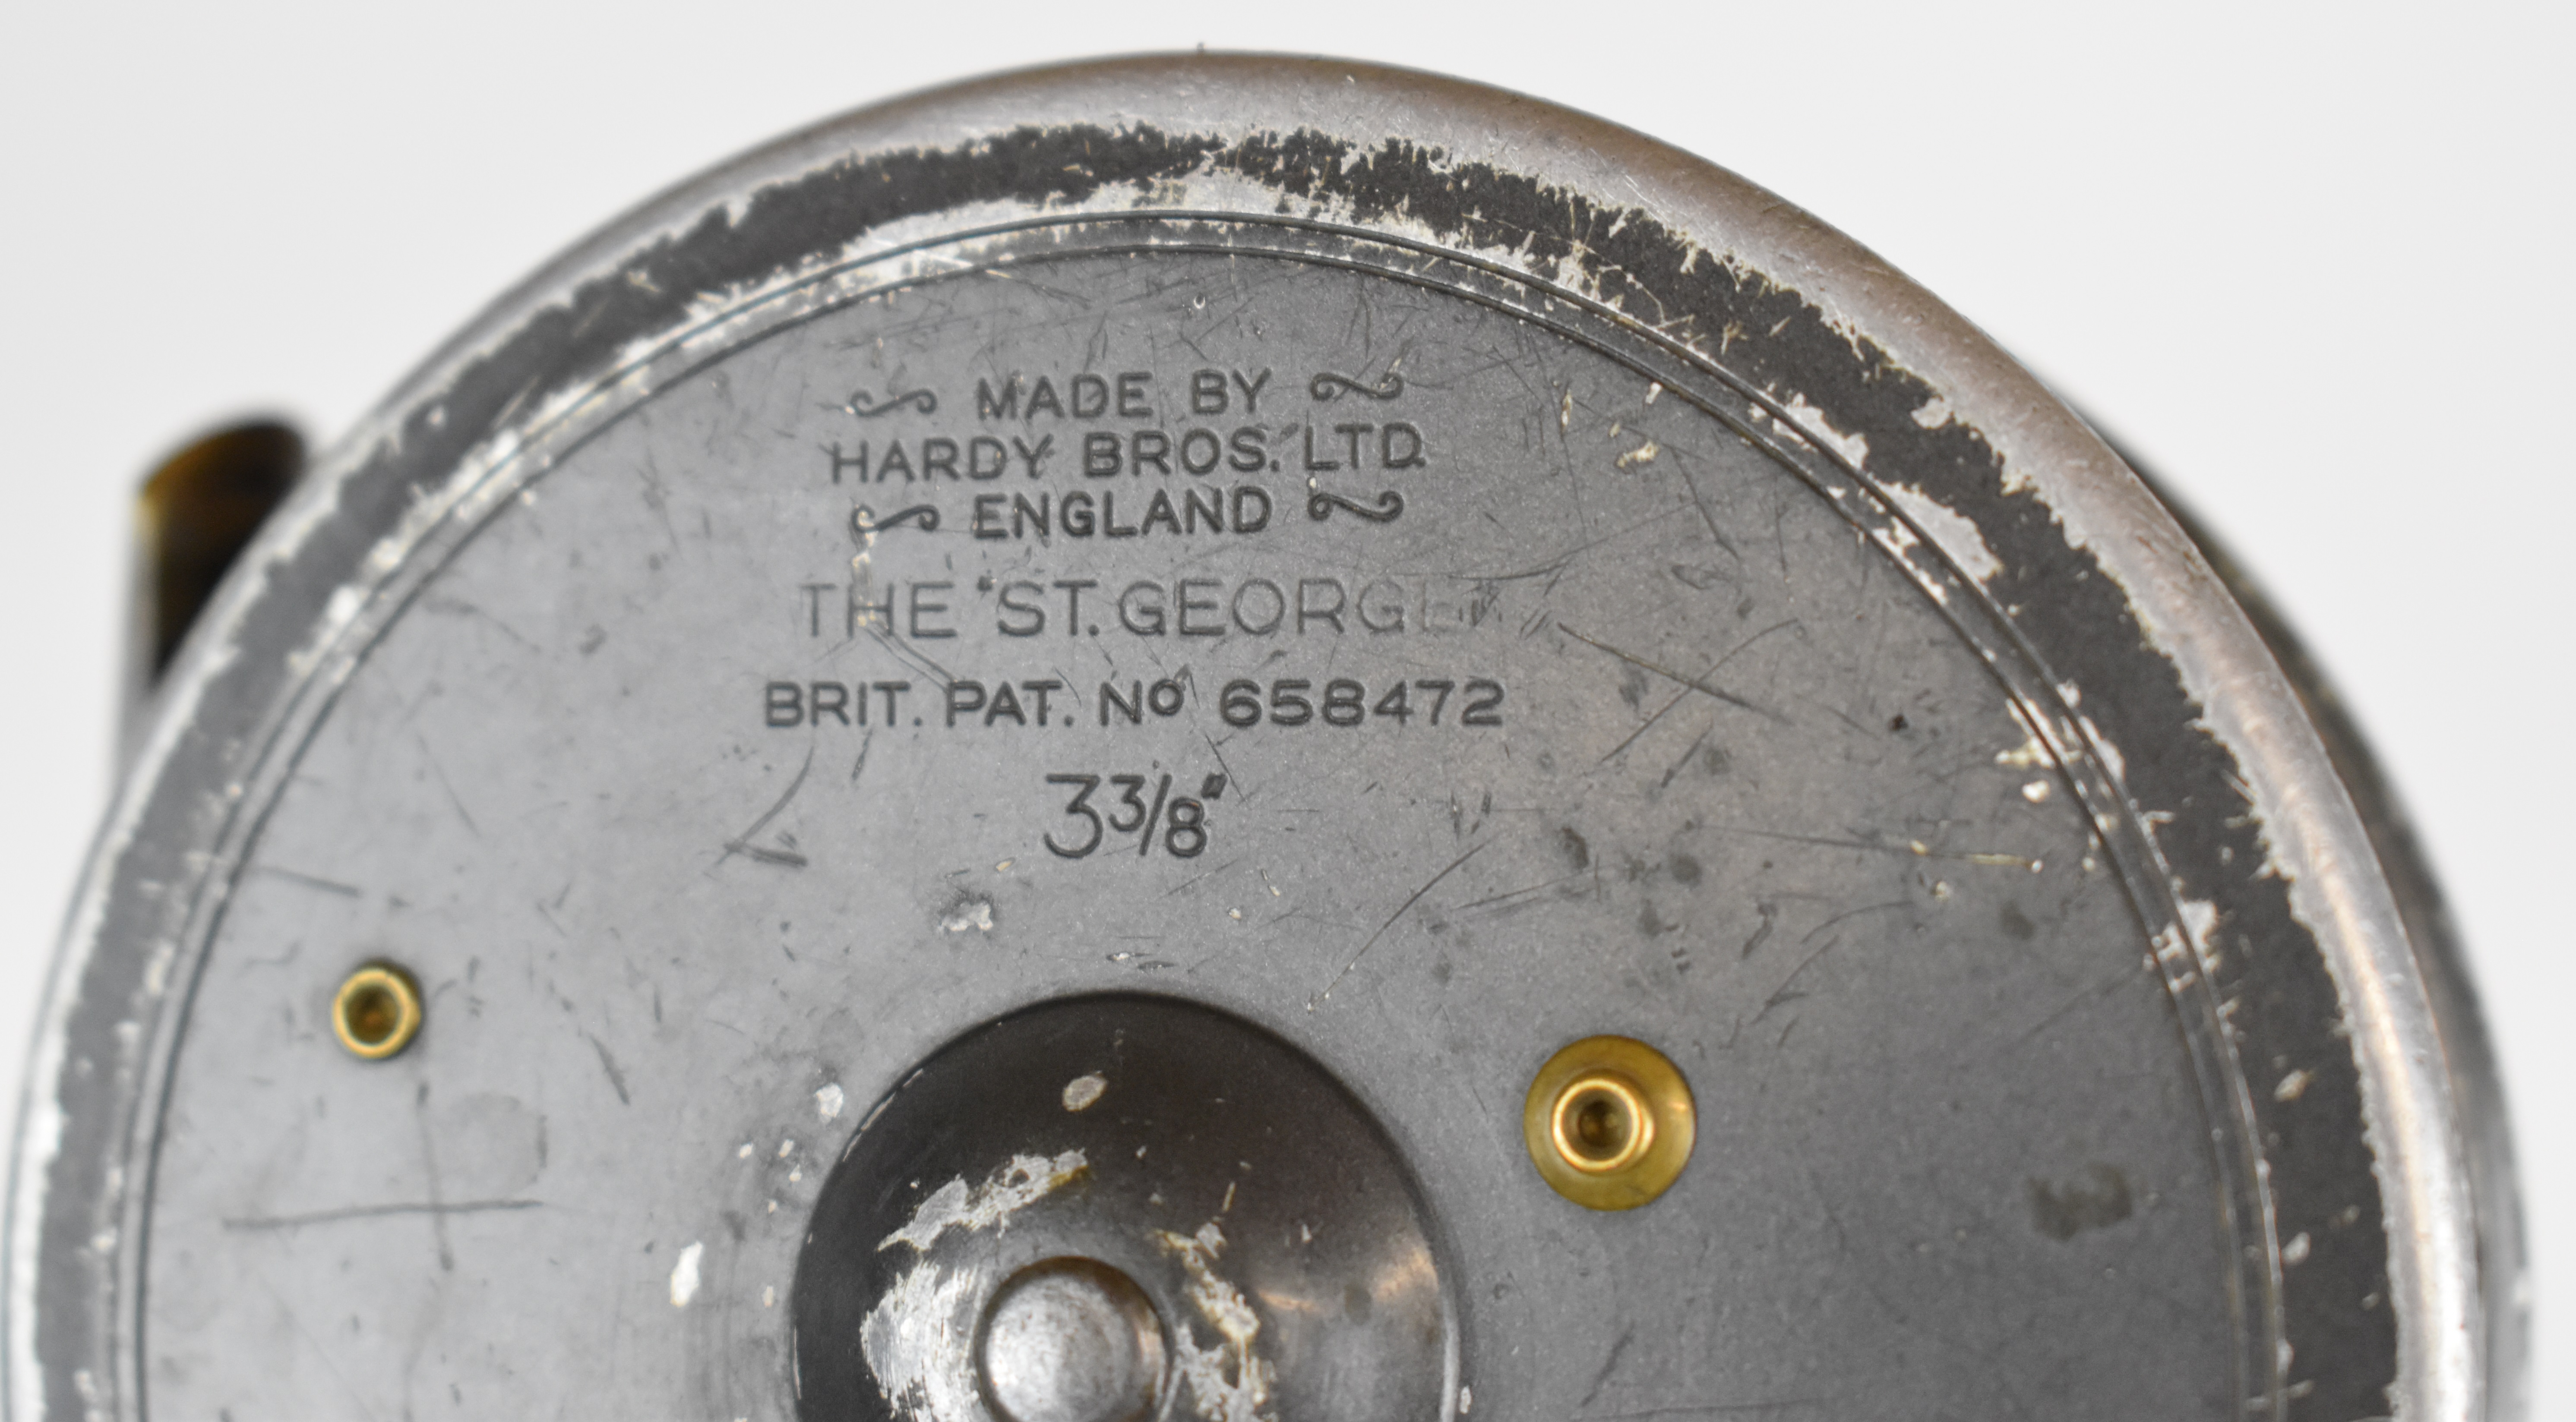 Hardy fly fishing reel 'The St George' 3 3/8", in Hardy soft case - Image 3 of 4